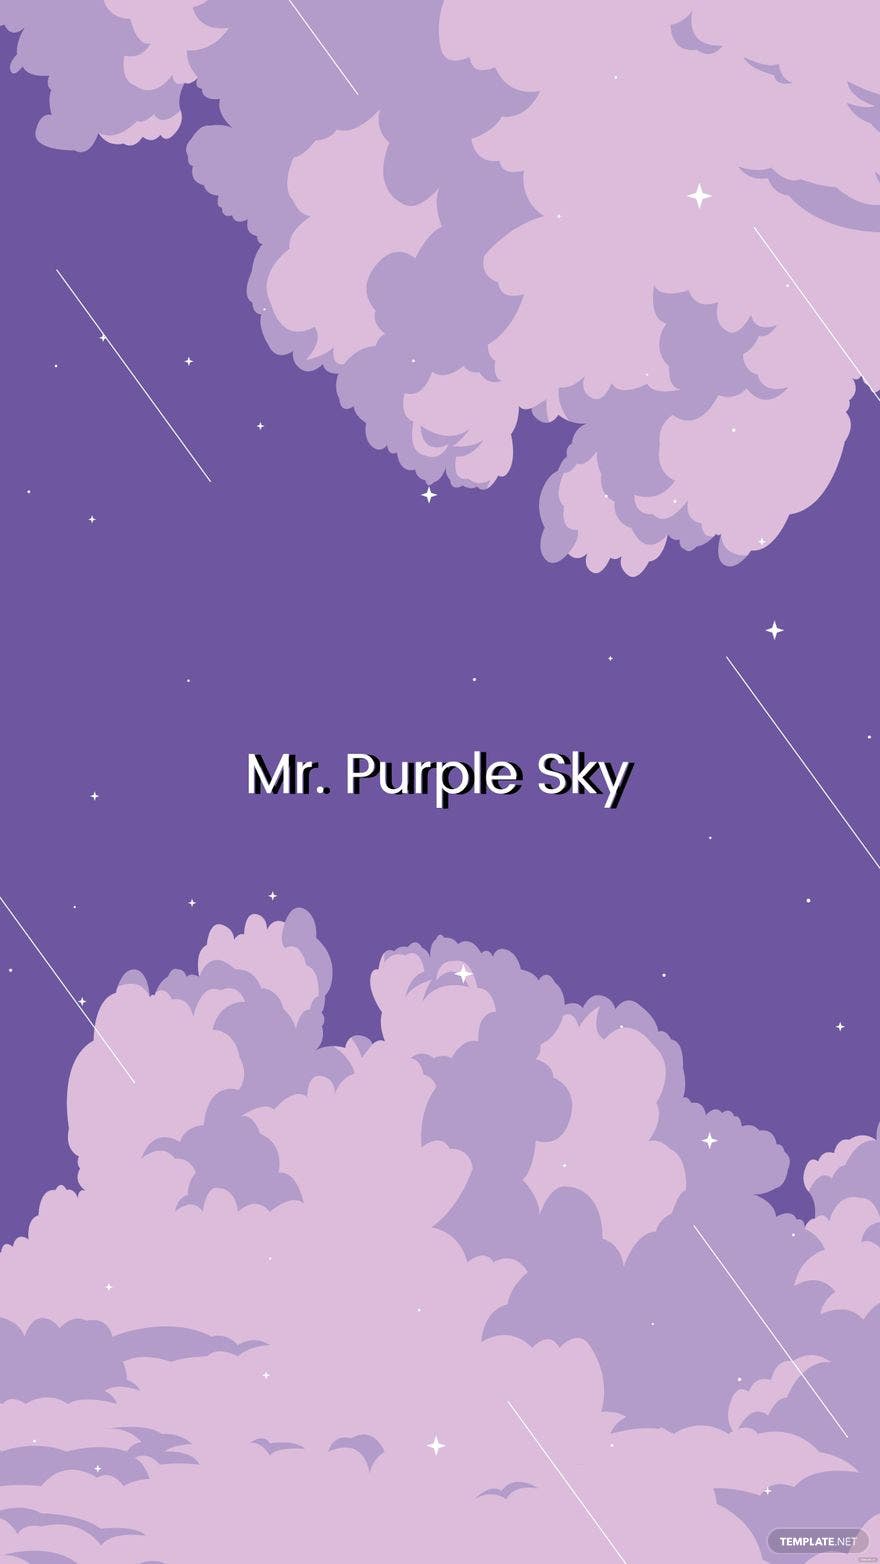 A purple sky with white clouds and shooting stars. - Phone, cute purple, purple quotes, violet